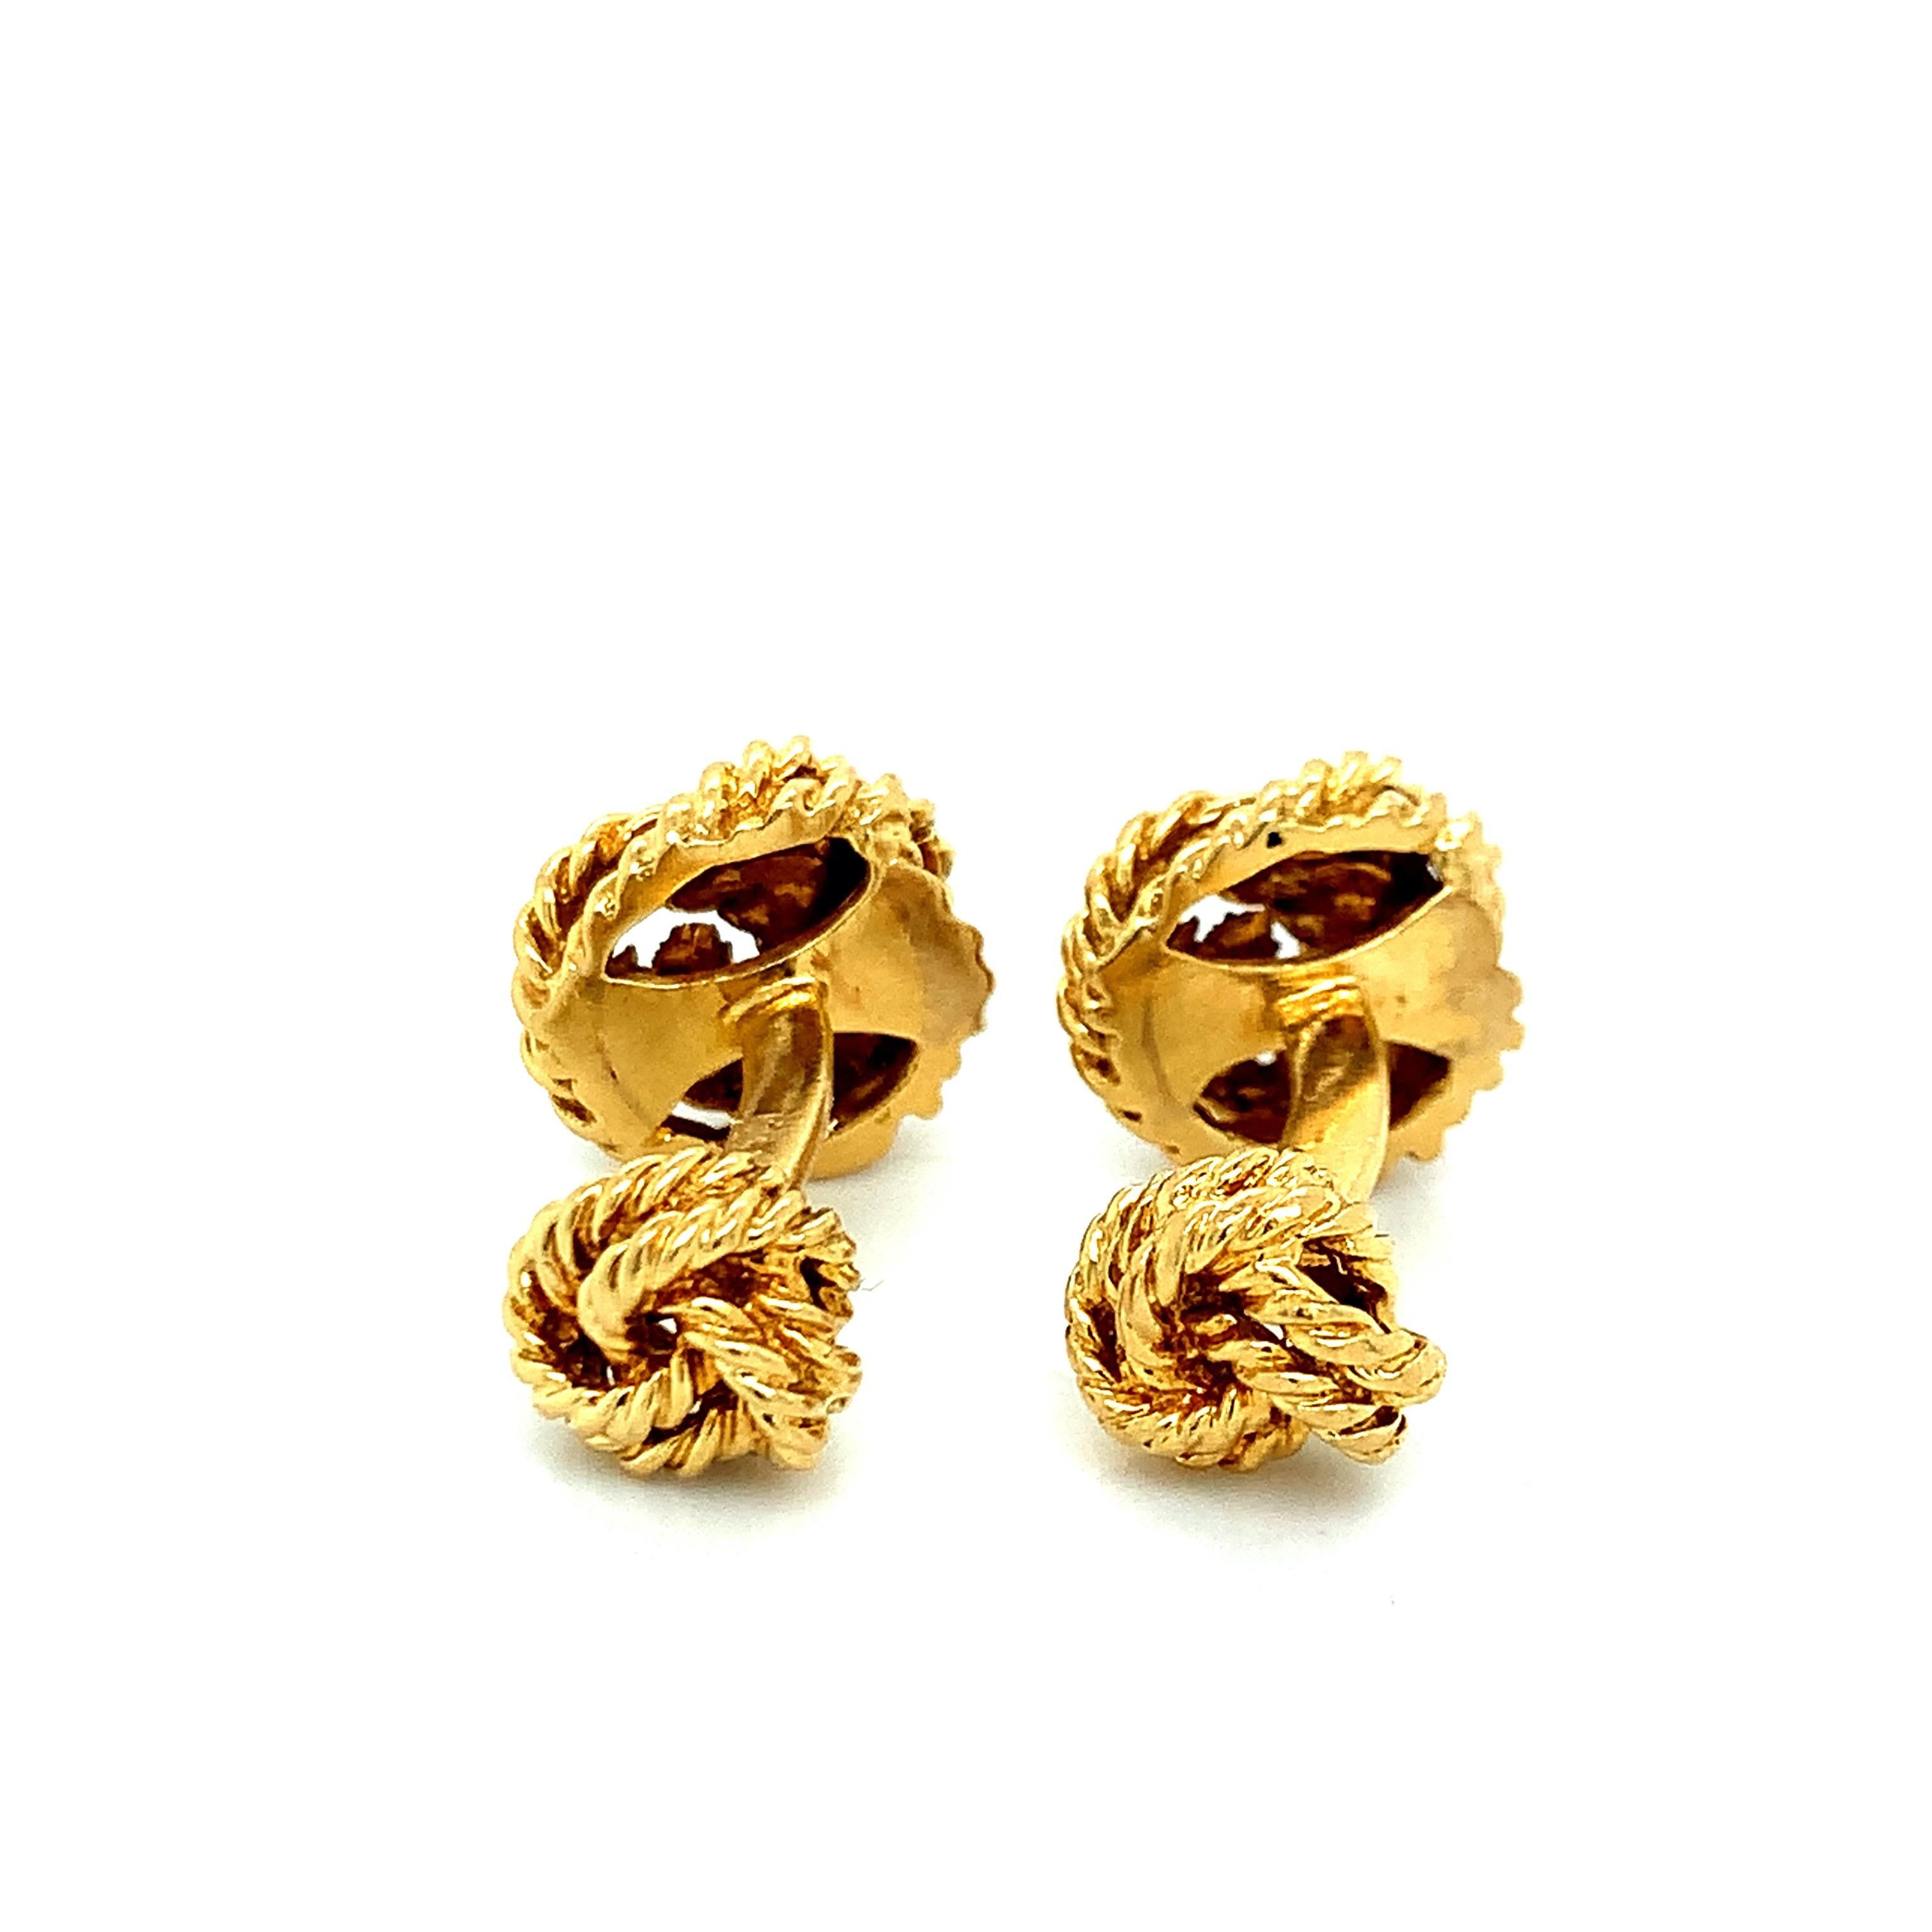 Tiffany & Co. Yellow Gold Rope Cufflinks In Excellent Condition For Sale In New York, NY